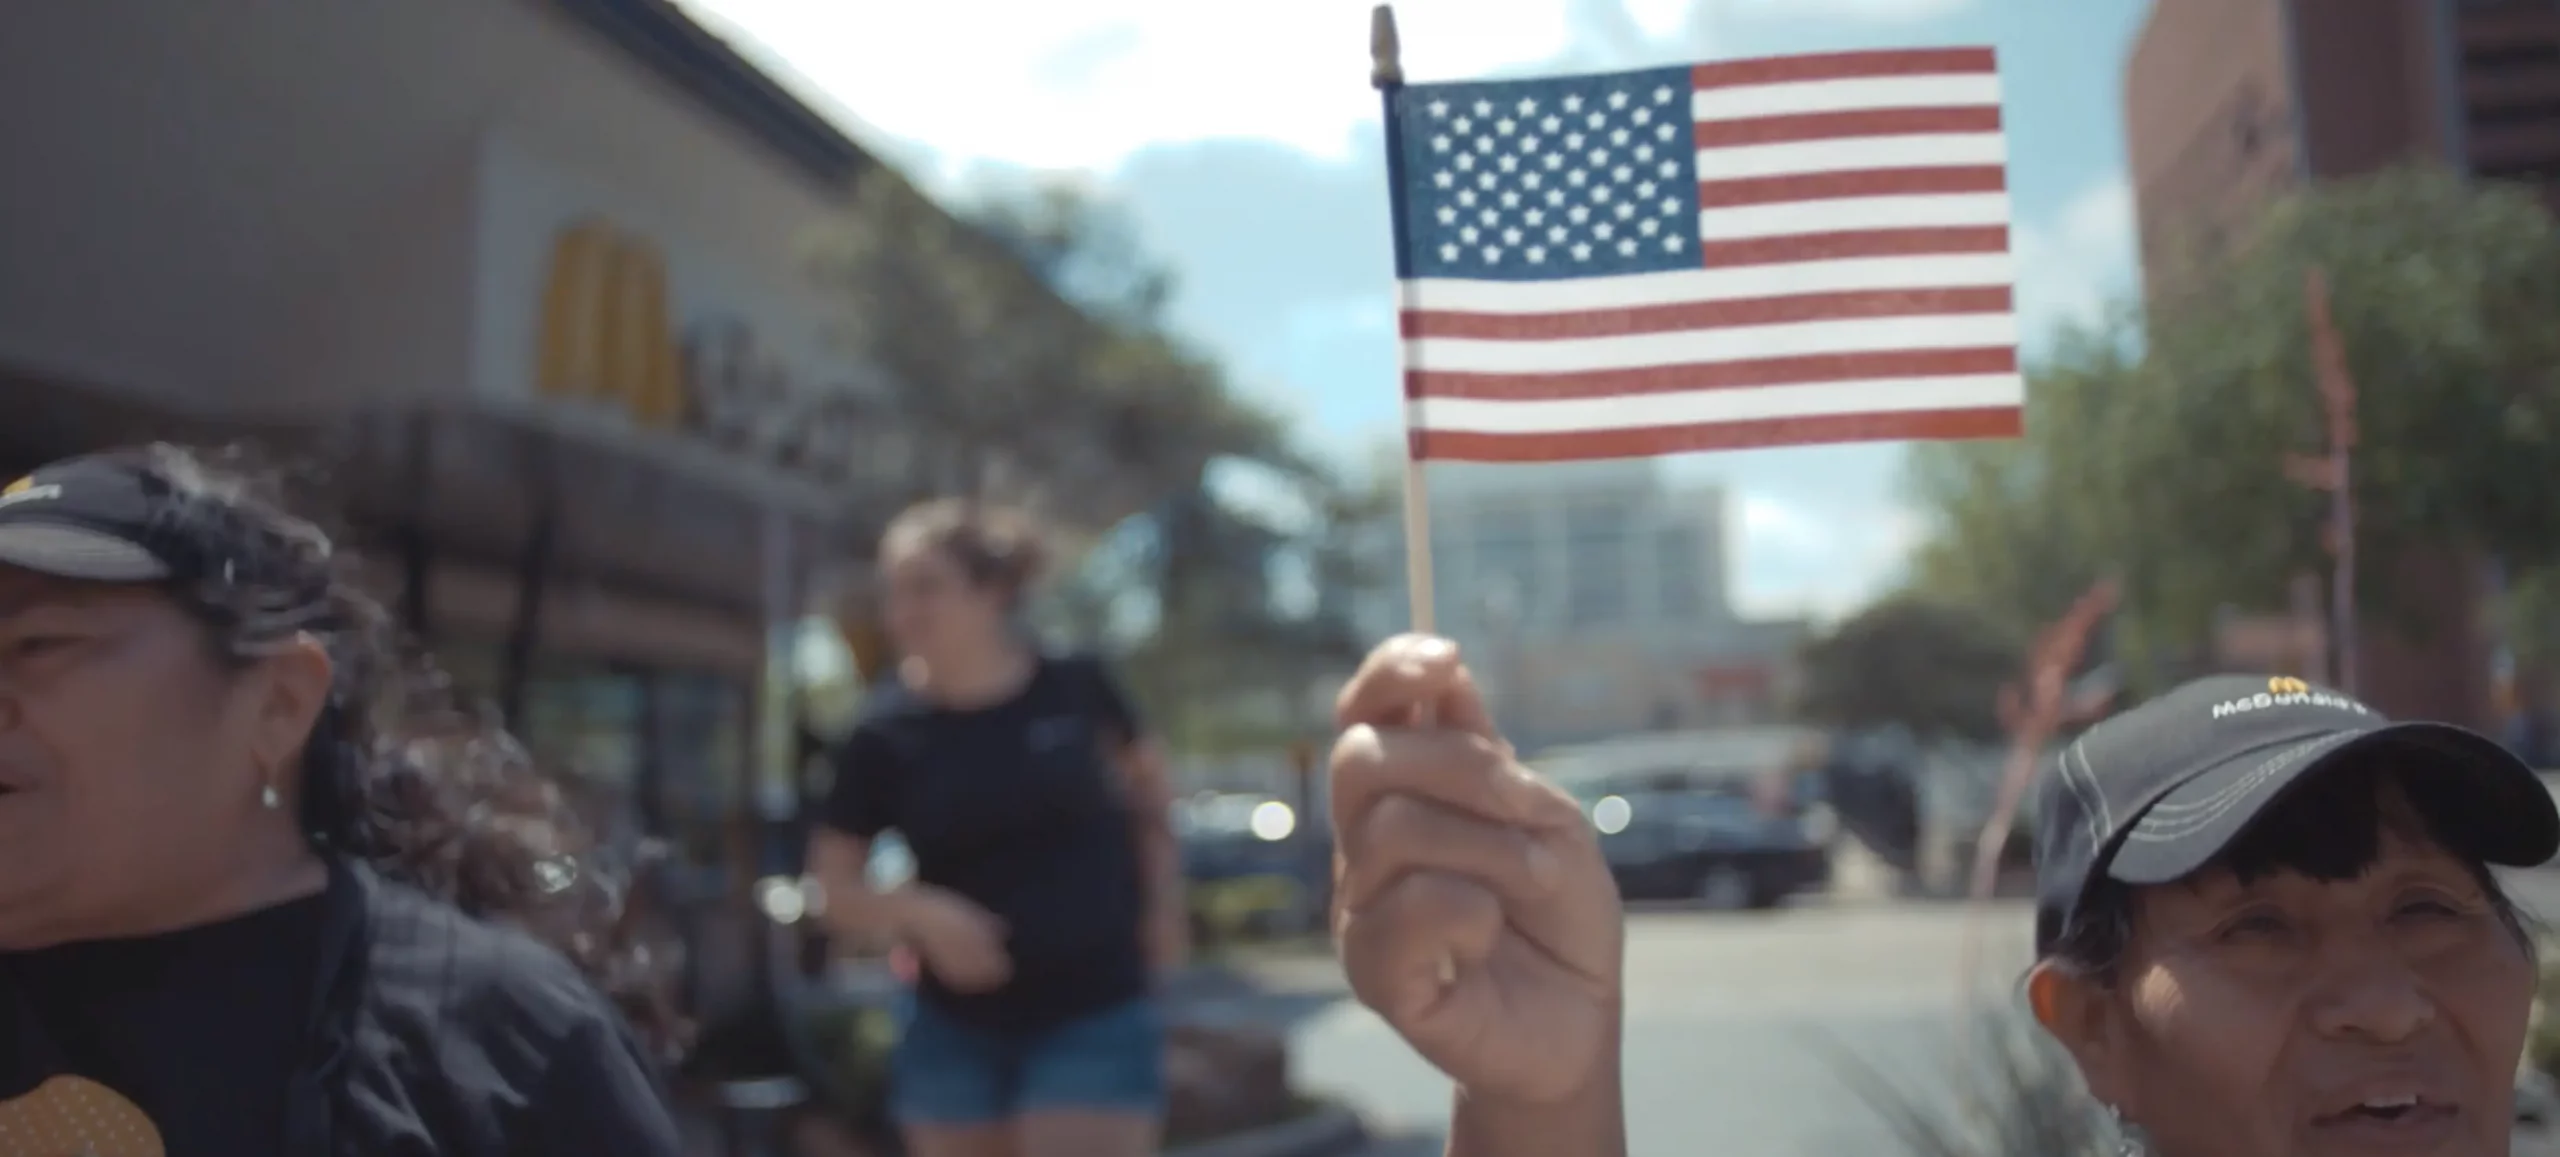 A person waving an American flag during a protest as part of a nonprofit advocacy video.